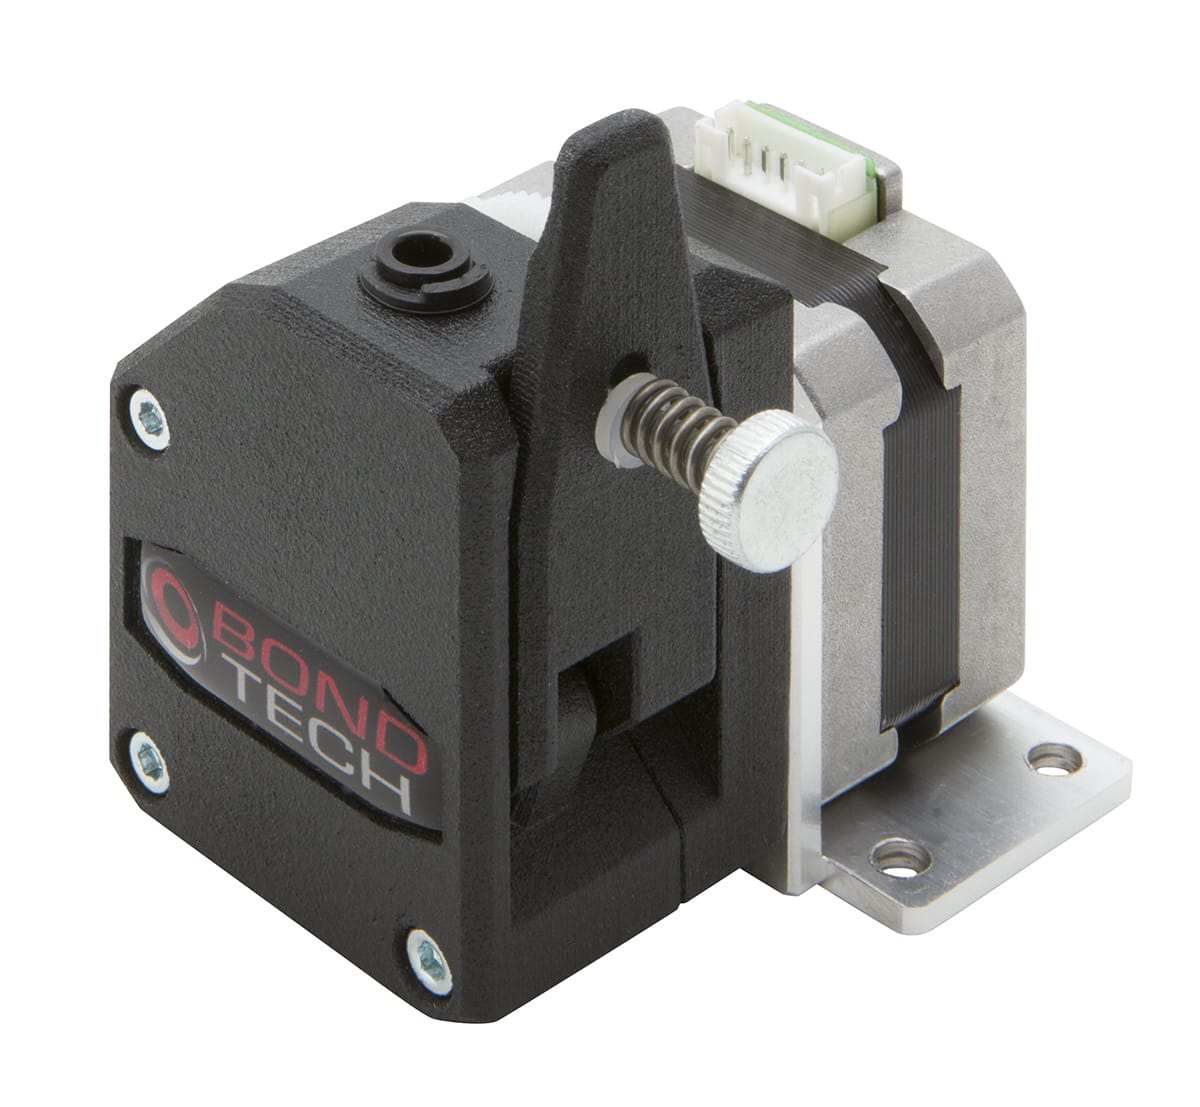  Bondtech's new BMG Extruder for powerful 3D printing 